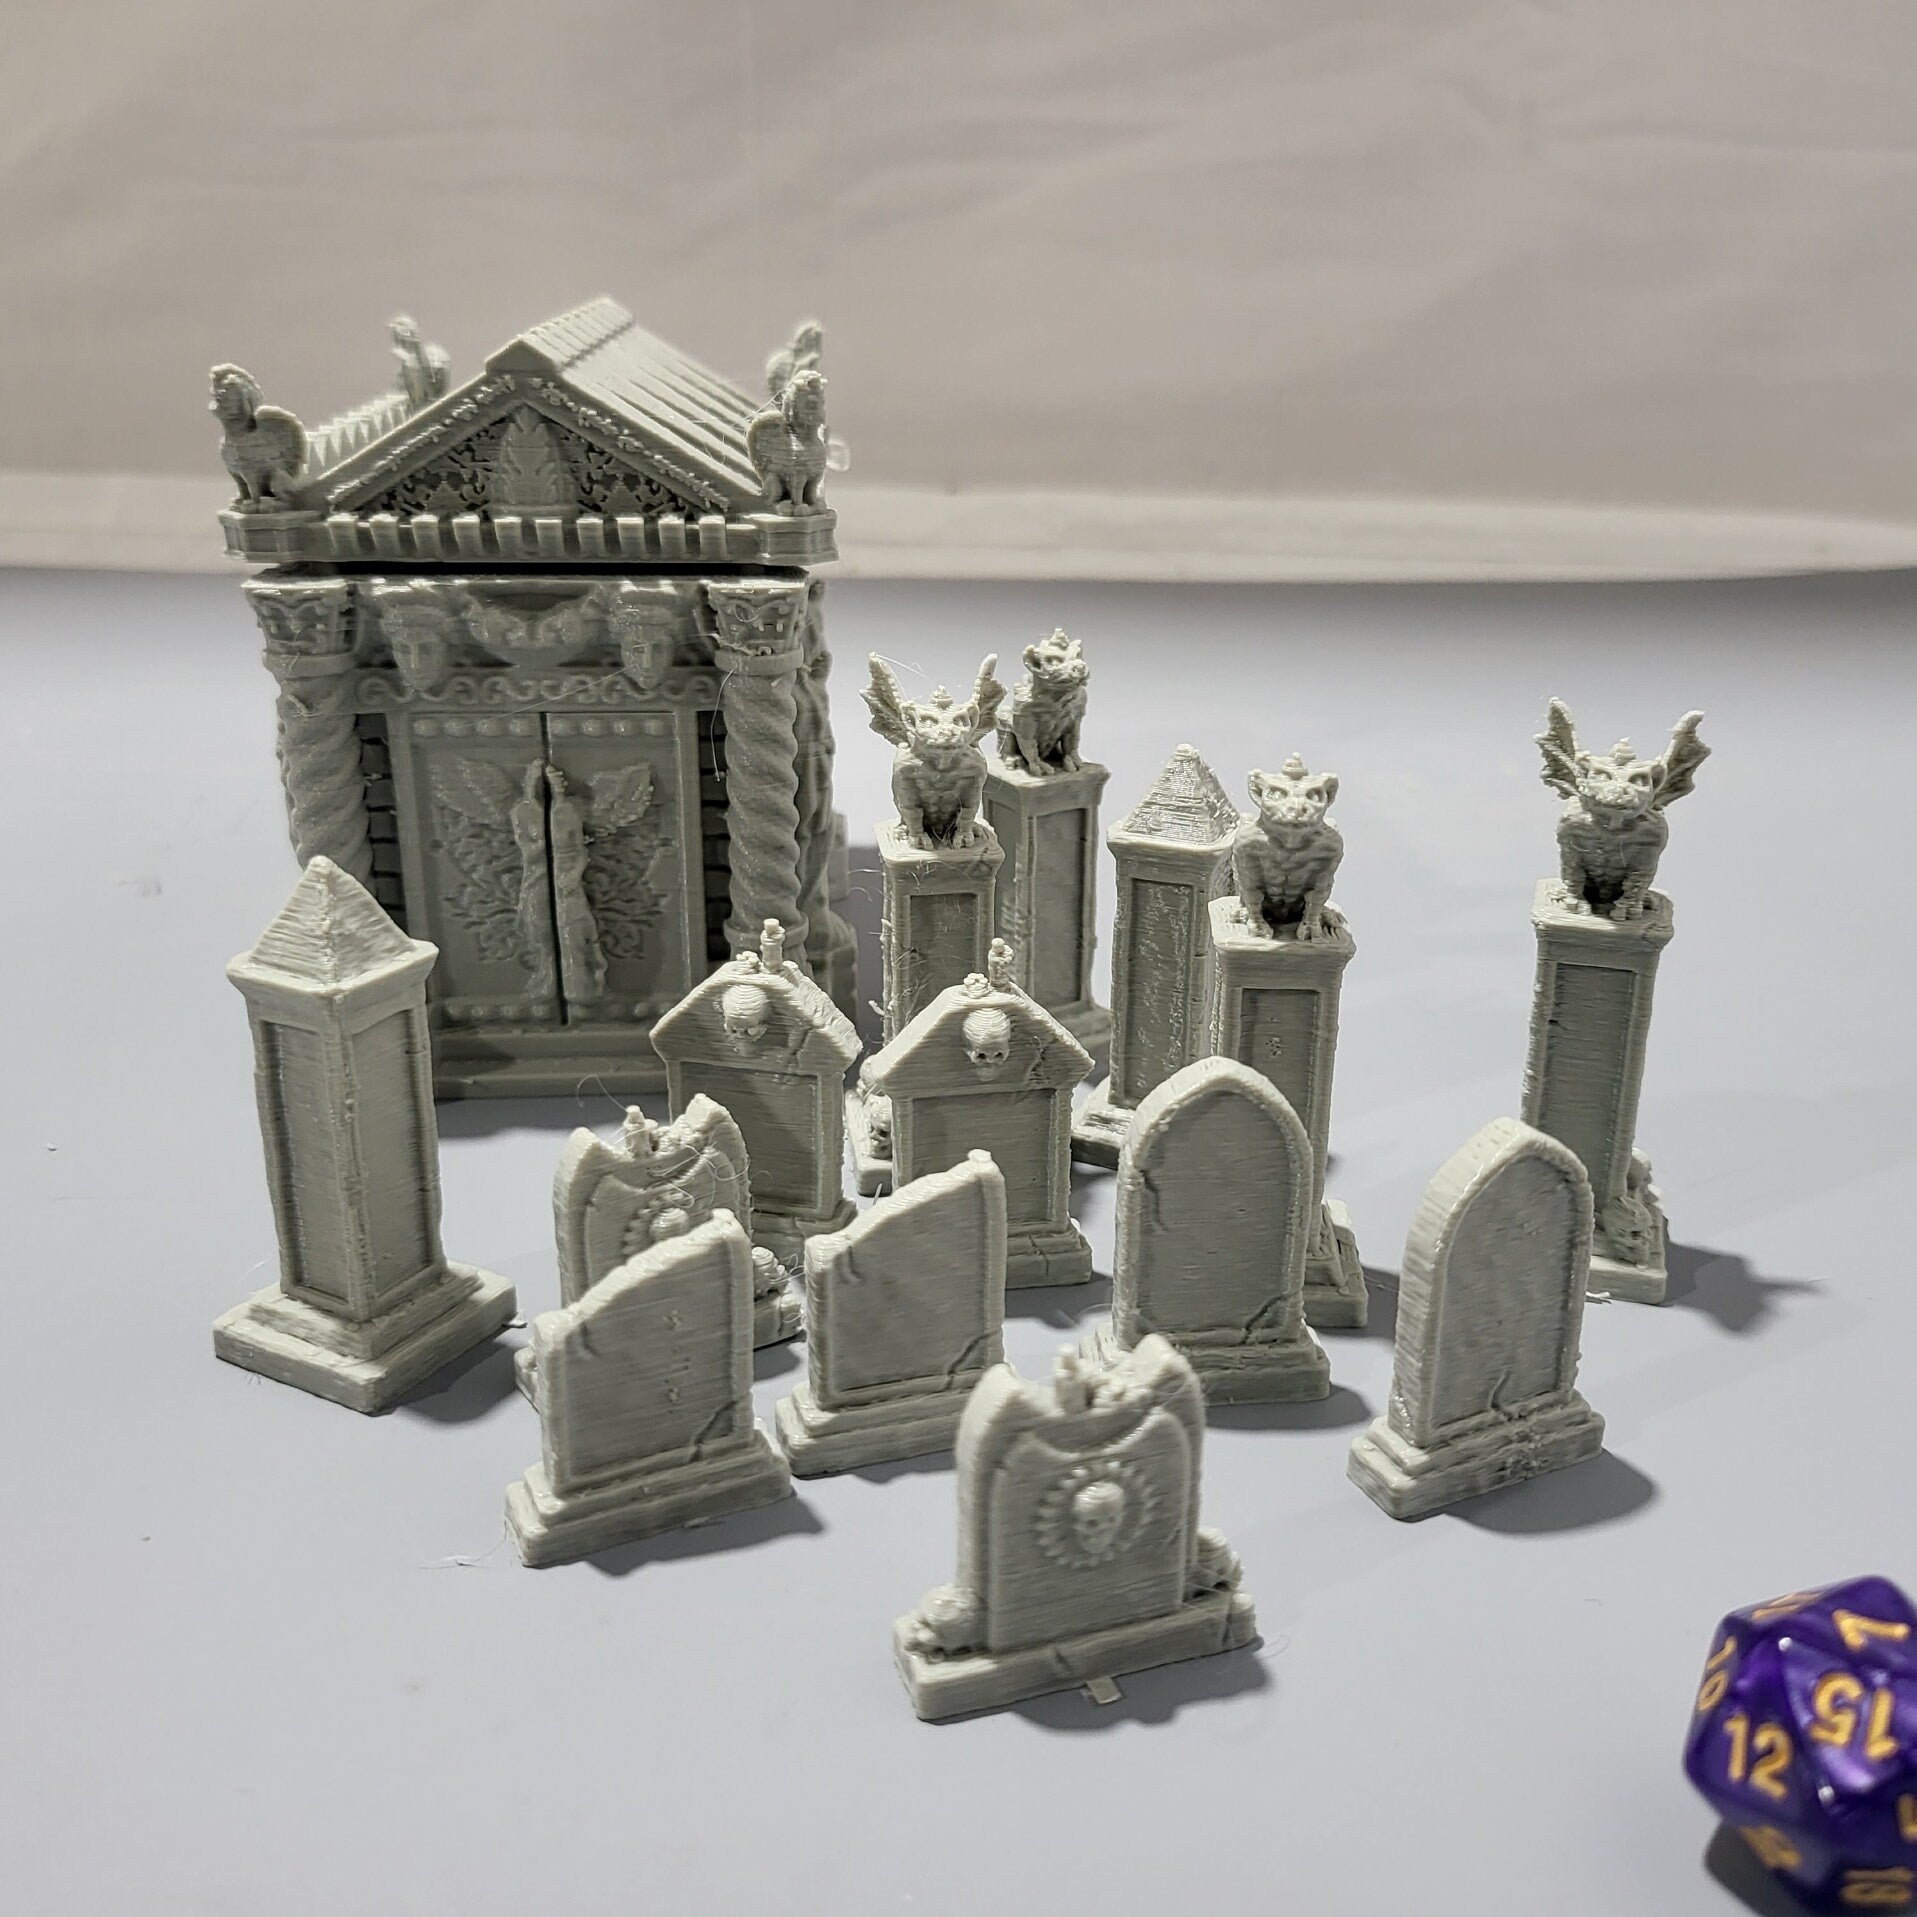 stocking stuffer, christmas gift, Tombstones, gaming, tabletop, tabletop games, Stocking, gift, christmas, perfect gift, terrain, graveyard, cemetery, dnd terrain, dungeons and dragons, buy now, sale, black friday, holidays